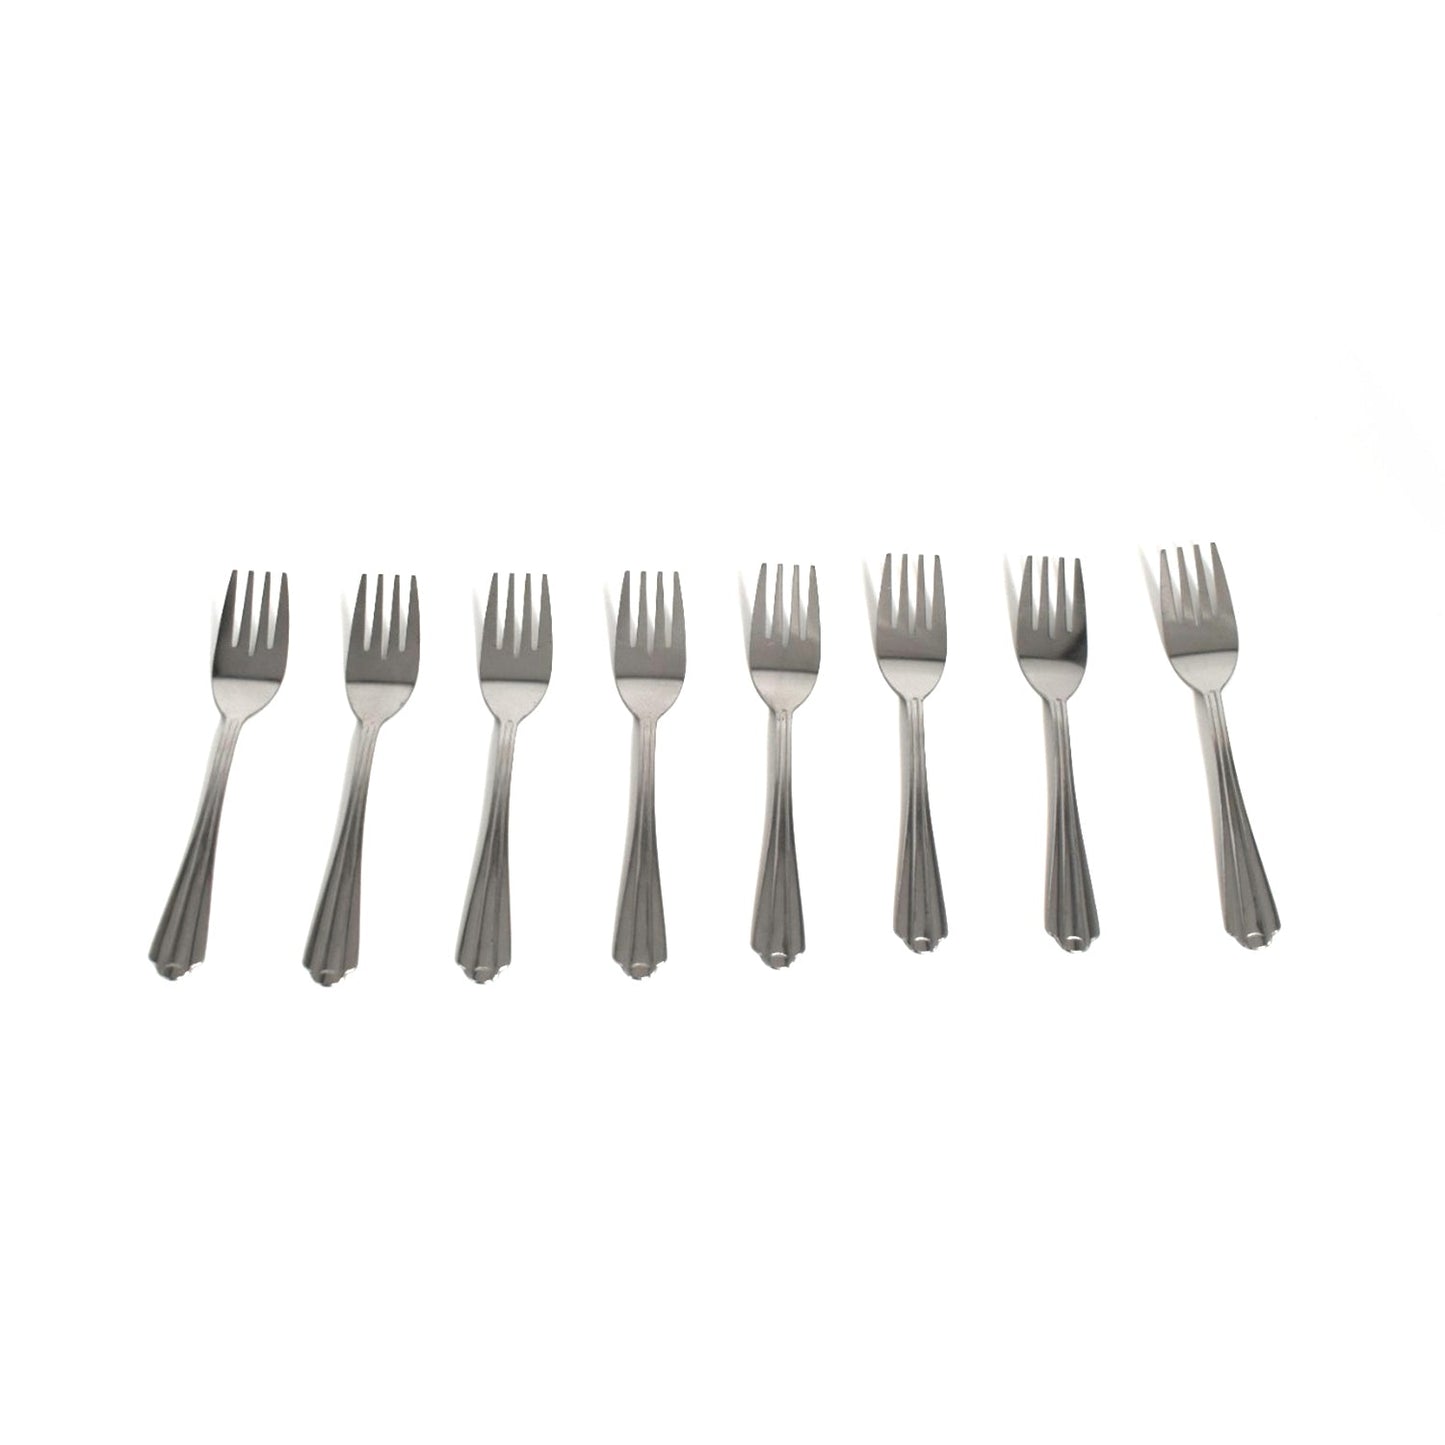 2775 Small Dinner Fork for home and kitchen. (set of 8Pc)